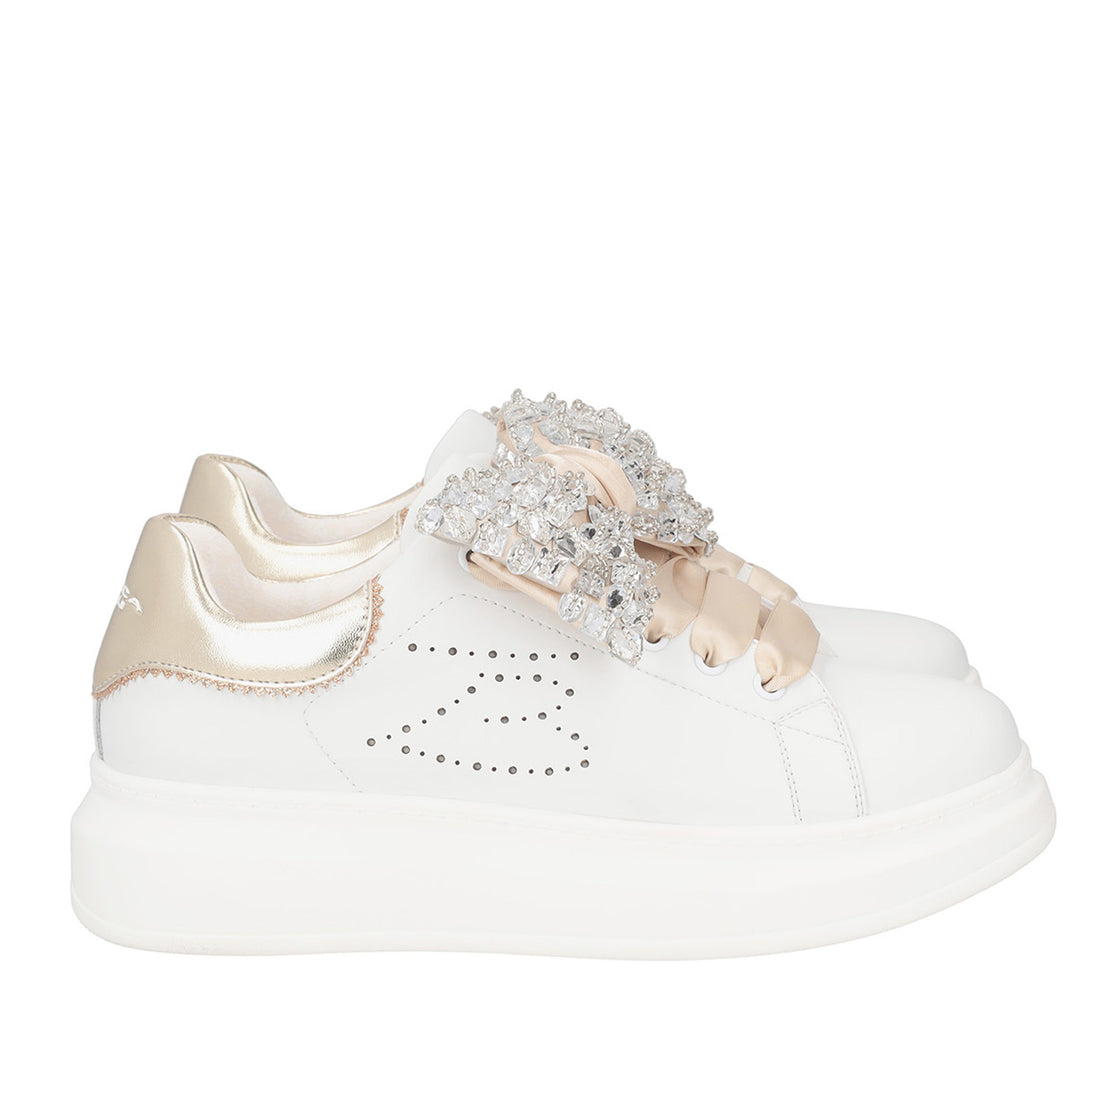 WHITE/GOLD GLAMOUR SNEAKER IN LEATHER WITH RHINESTONE BOW